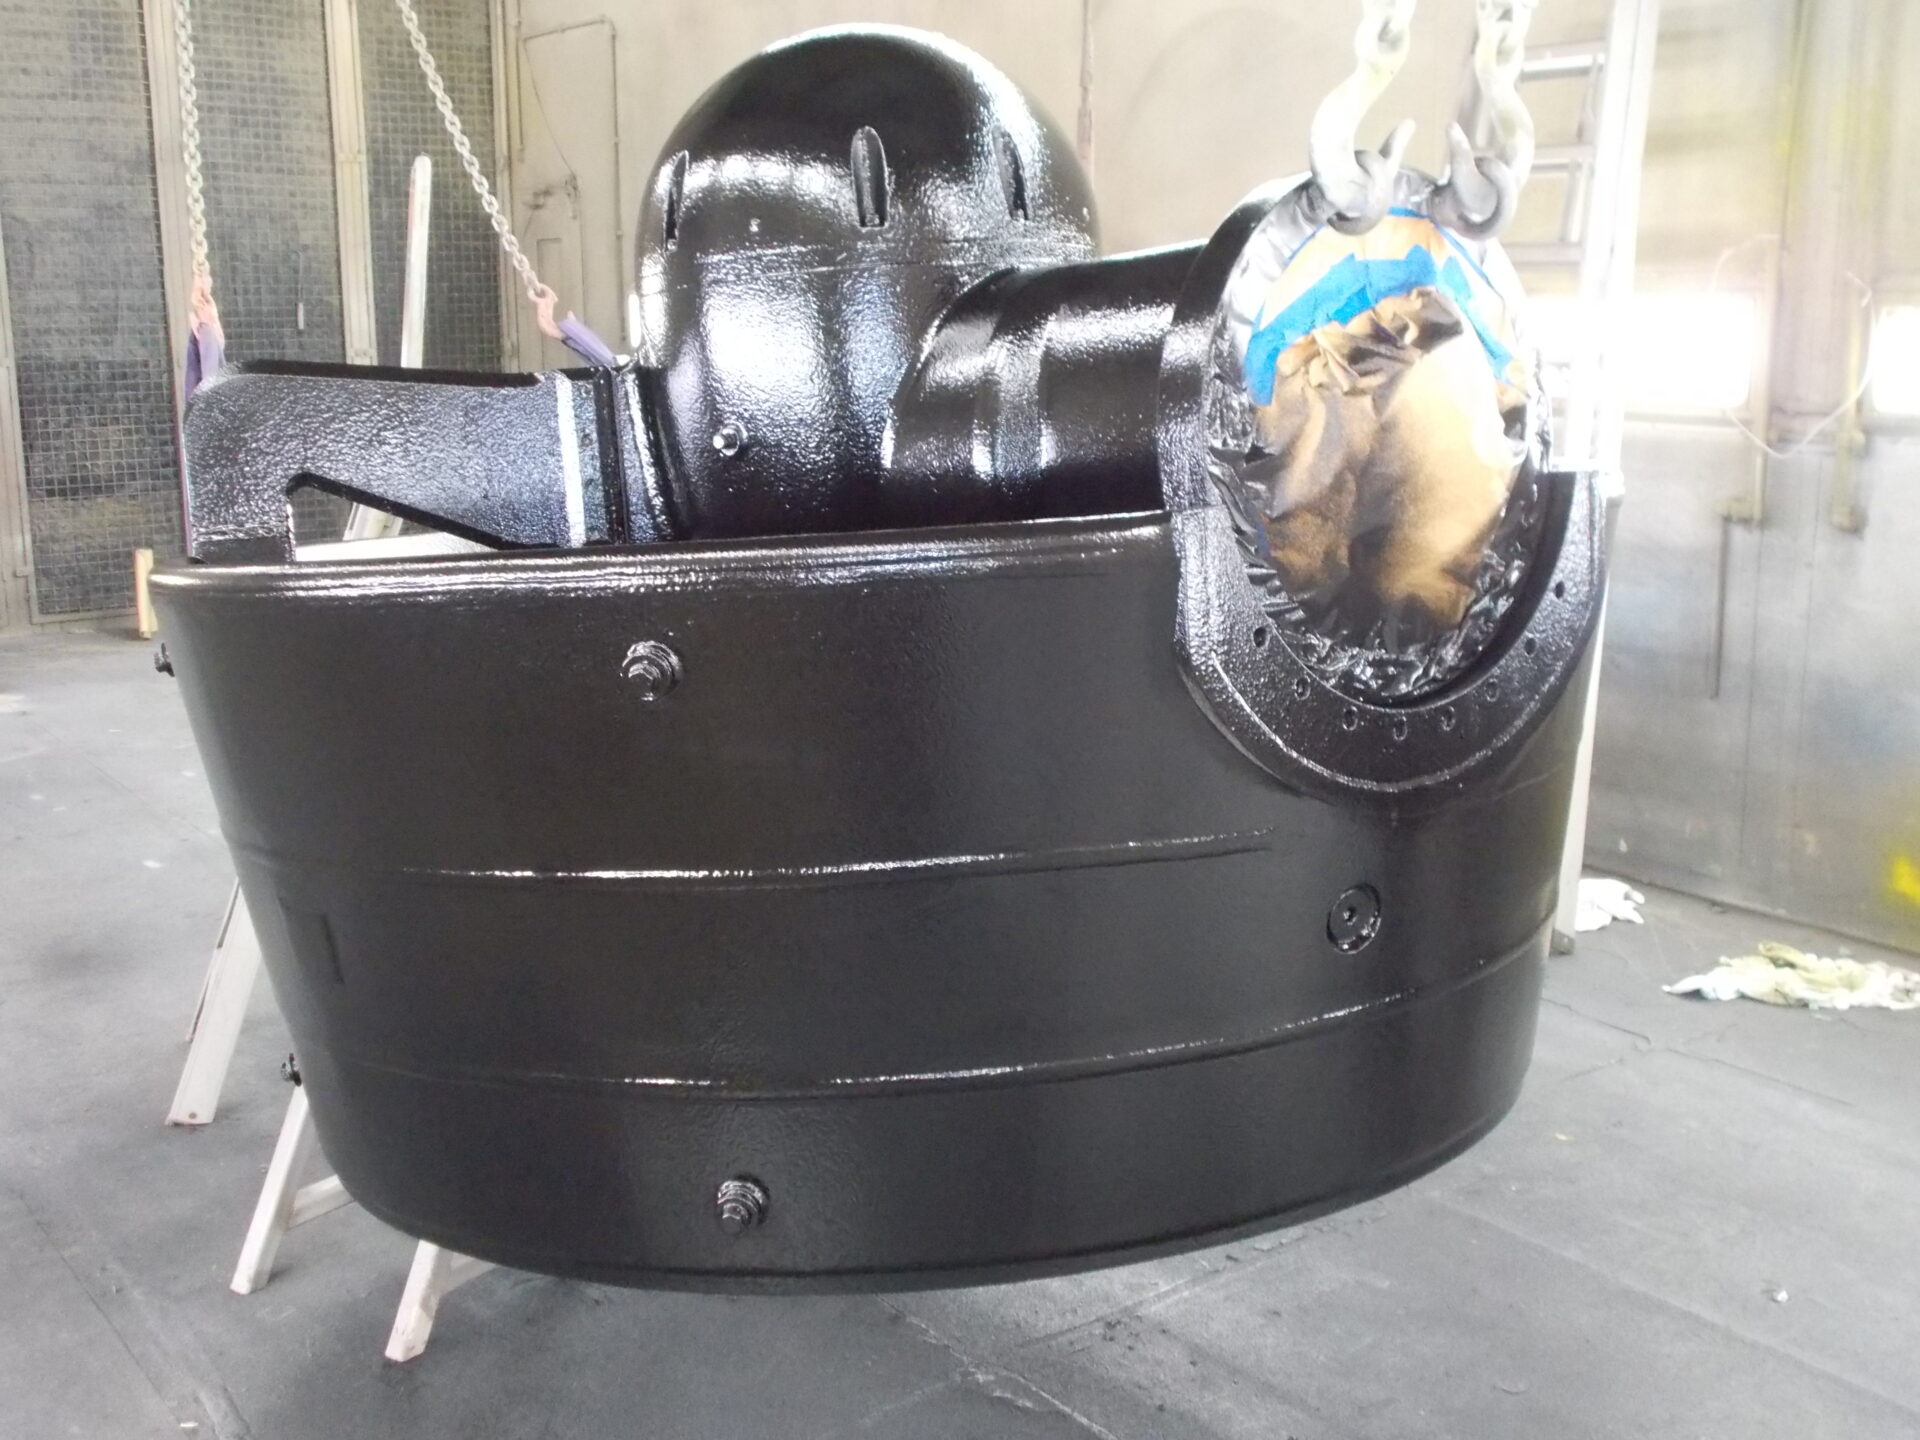 Bow thruster coated with Ecoshield